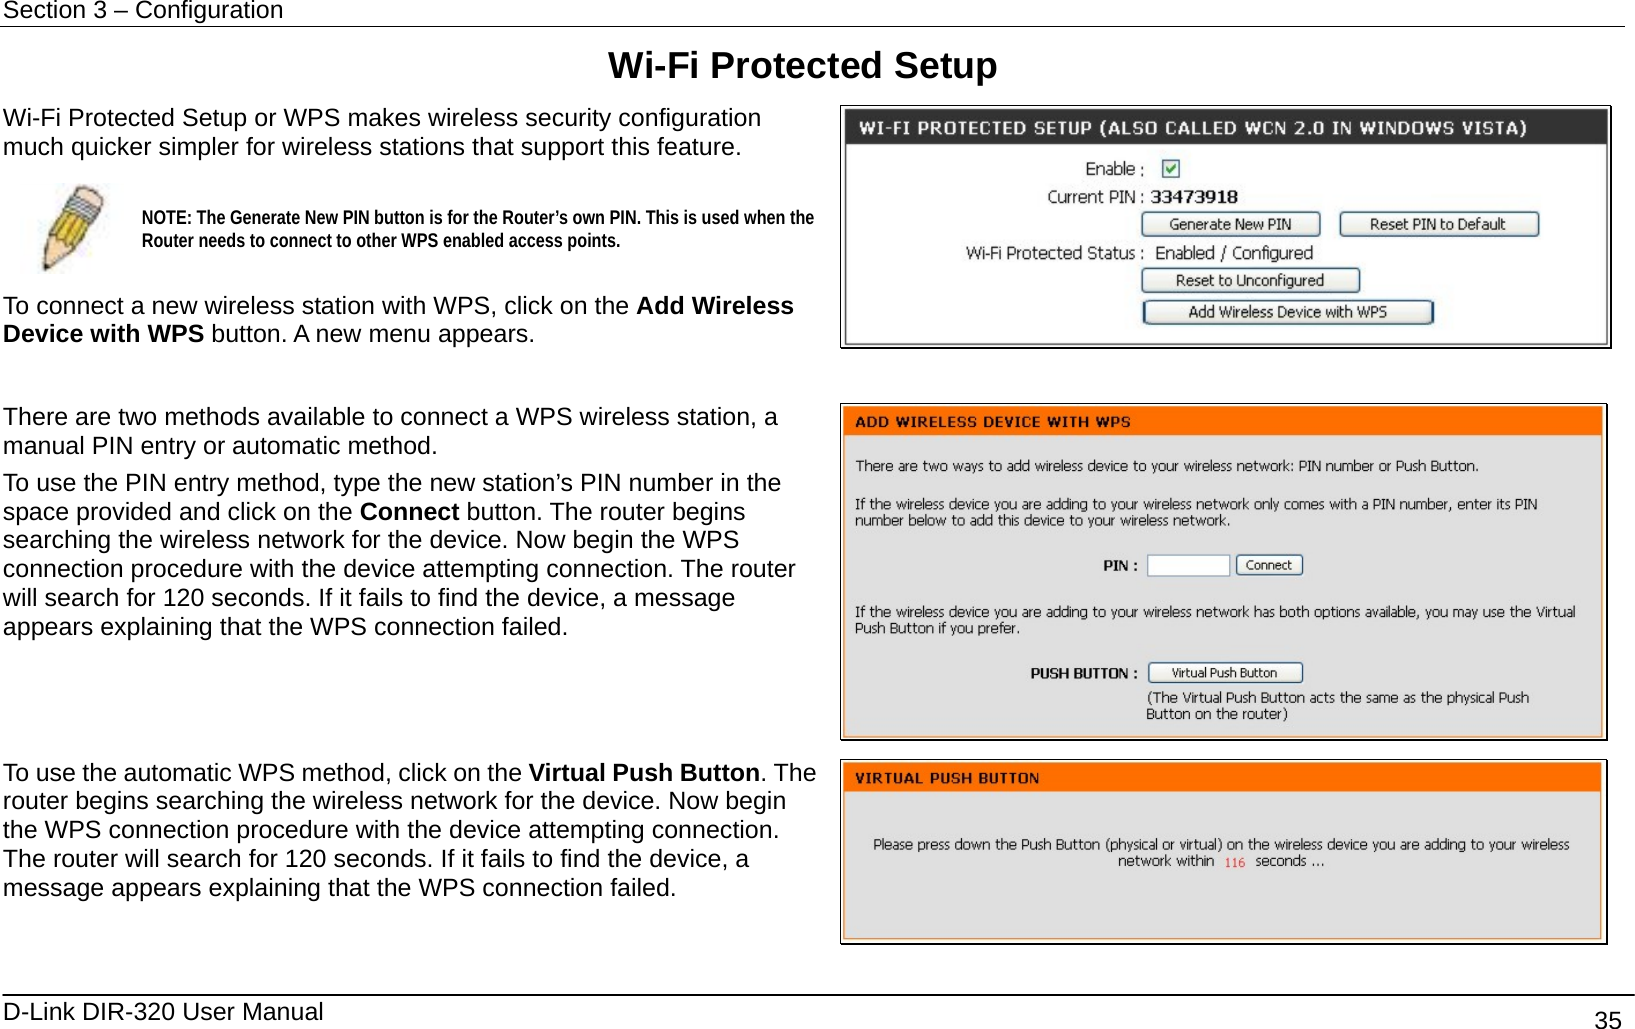 Section 3 – Configuration   D-Link DIR-320 User Manual                                       35 Wi-Fi Protected Setup Wi-Fi Protected Setup or WPS makes wireless security configuration much quicker simpler for wireless stations that support this feature.    NOTE: The Generate New PIN button is for the Router’s own PIN. This is used when the Router needs to connect to other WPS enabled access points.  To connect a new wireless station with WPS, click on the Add Wireless Device with WPS button. A new menu appears.   There are two methods available to connect a WPS wireless station, a manual PIN entry or automatic method. To use the PIN entry method, type the new station’s PIN number in the space provided and click on the Connect button. The router begins searching the wireless network for the device. Now begin the WPS connection procedure with the device attempting connection. The router will search for 120 seconds. If it fails to find the device, a message appears explaining that the WPS connection failed.    To use the automatic WPS method, click on the Virtual Push Button. The router begins searching the wireless network for the device. Now begin the WPS connection procedure with the device attempting connection. The router will search for 120 seconds. If it fails to find the device, a message appears explaining that the WPS connection failed.   